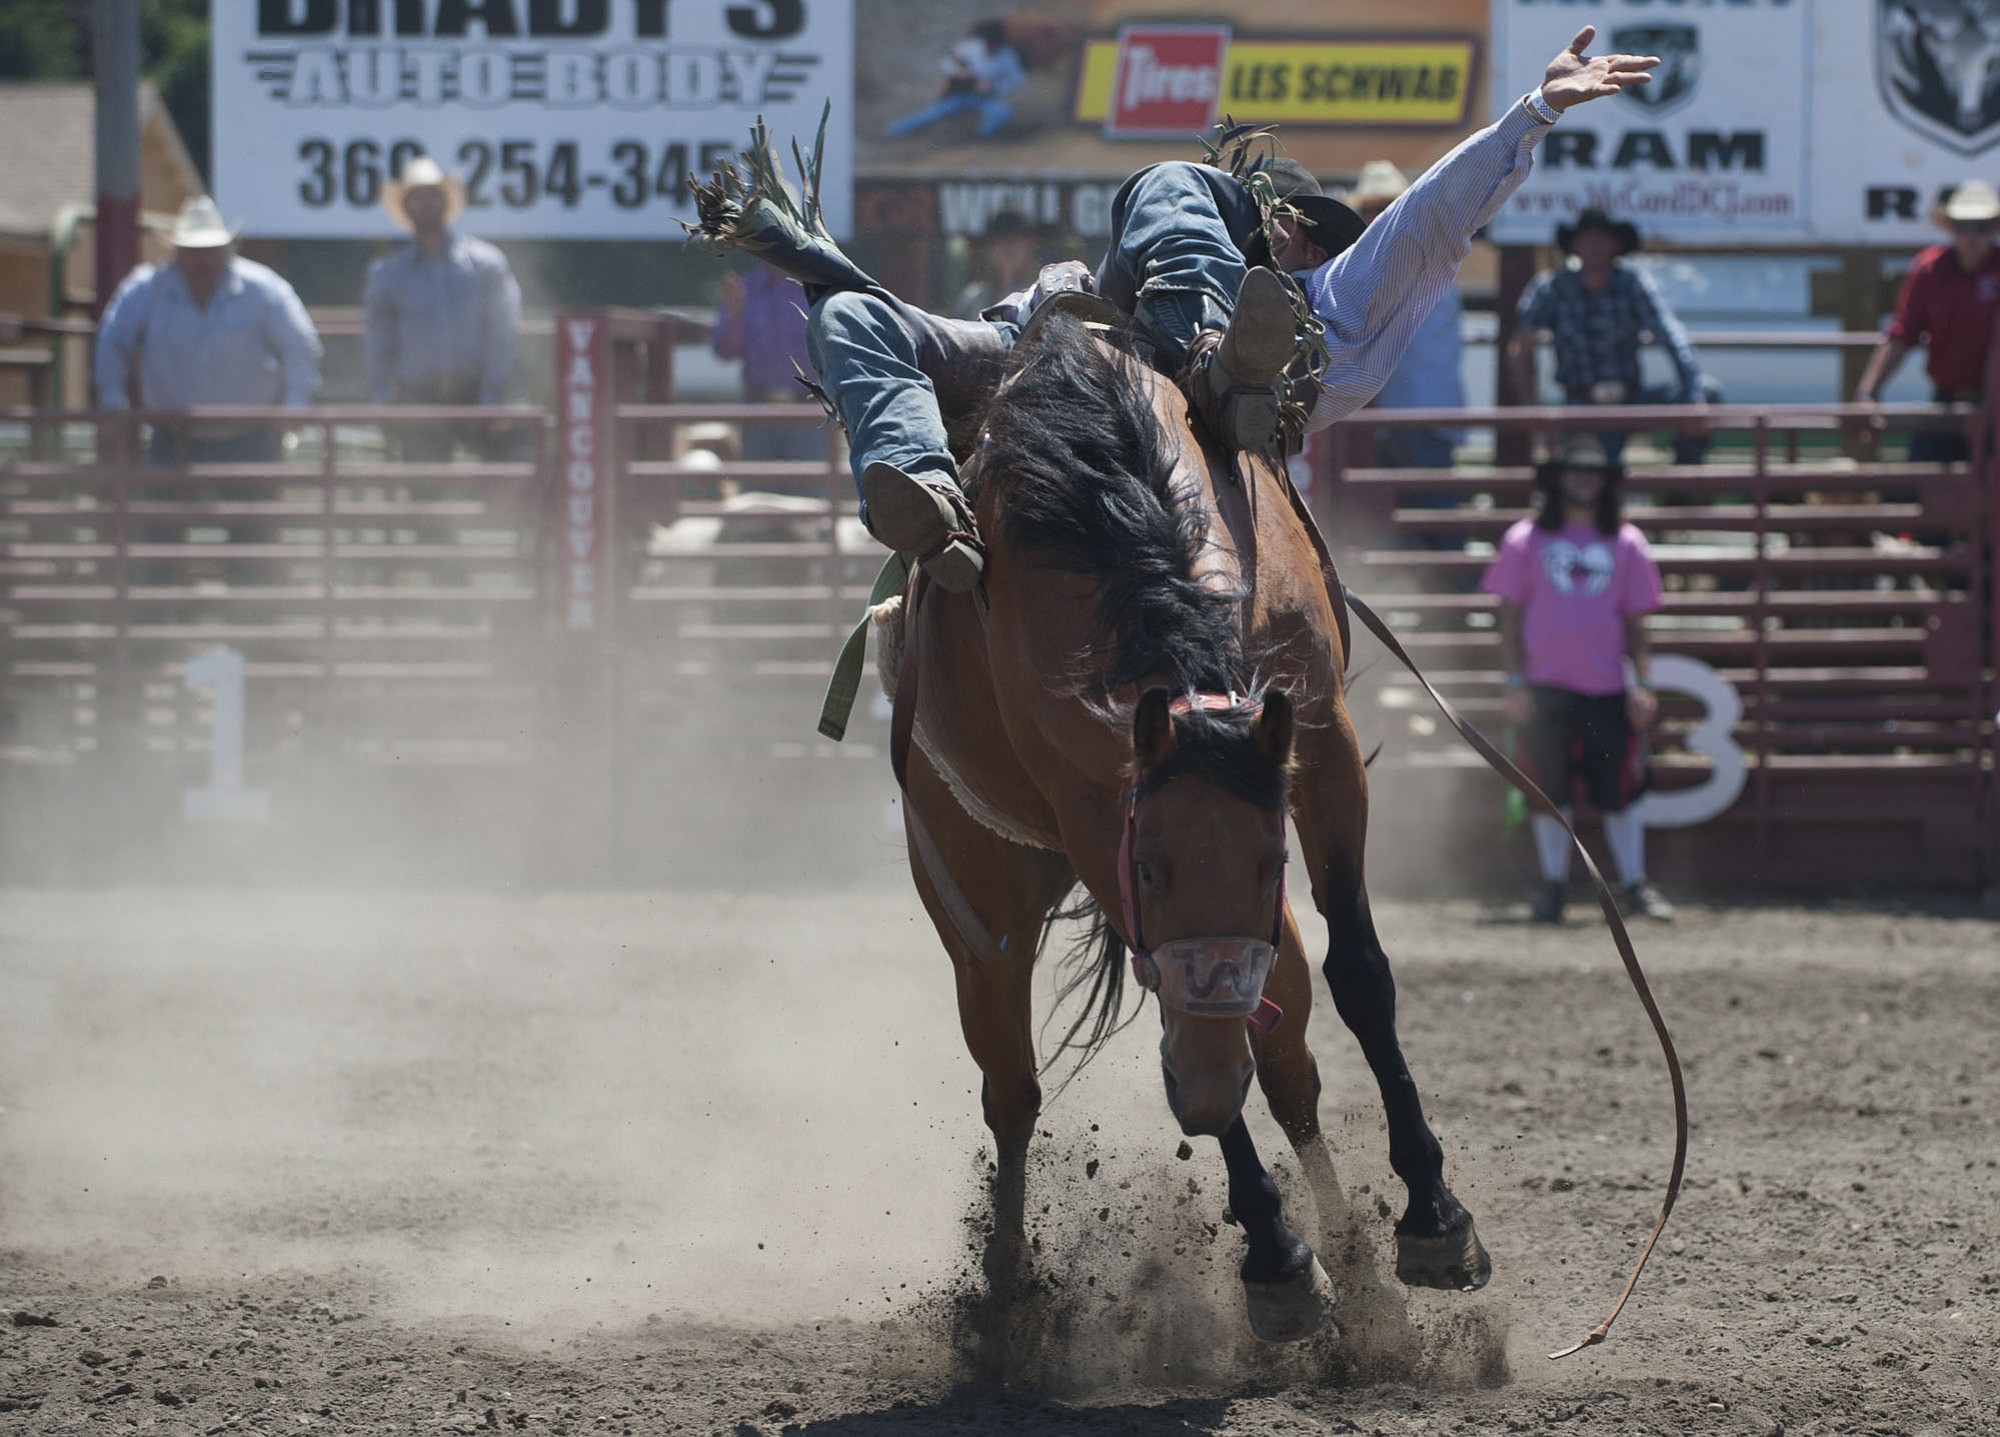 Kyle Bounds competes in the bareback riding event Sunday on the final day of the Vancouver Rodeo in Vancouver.